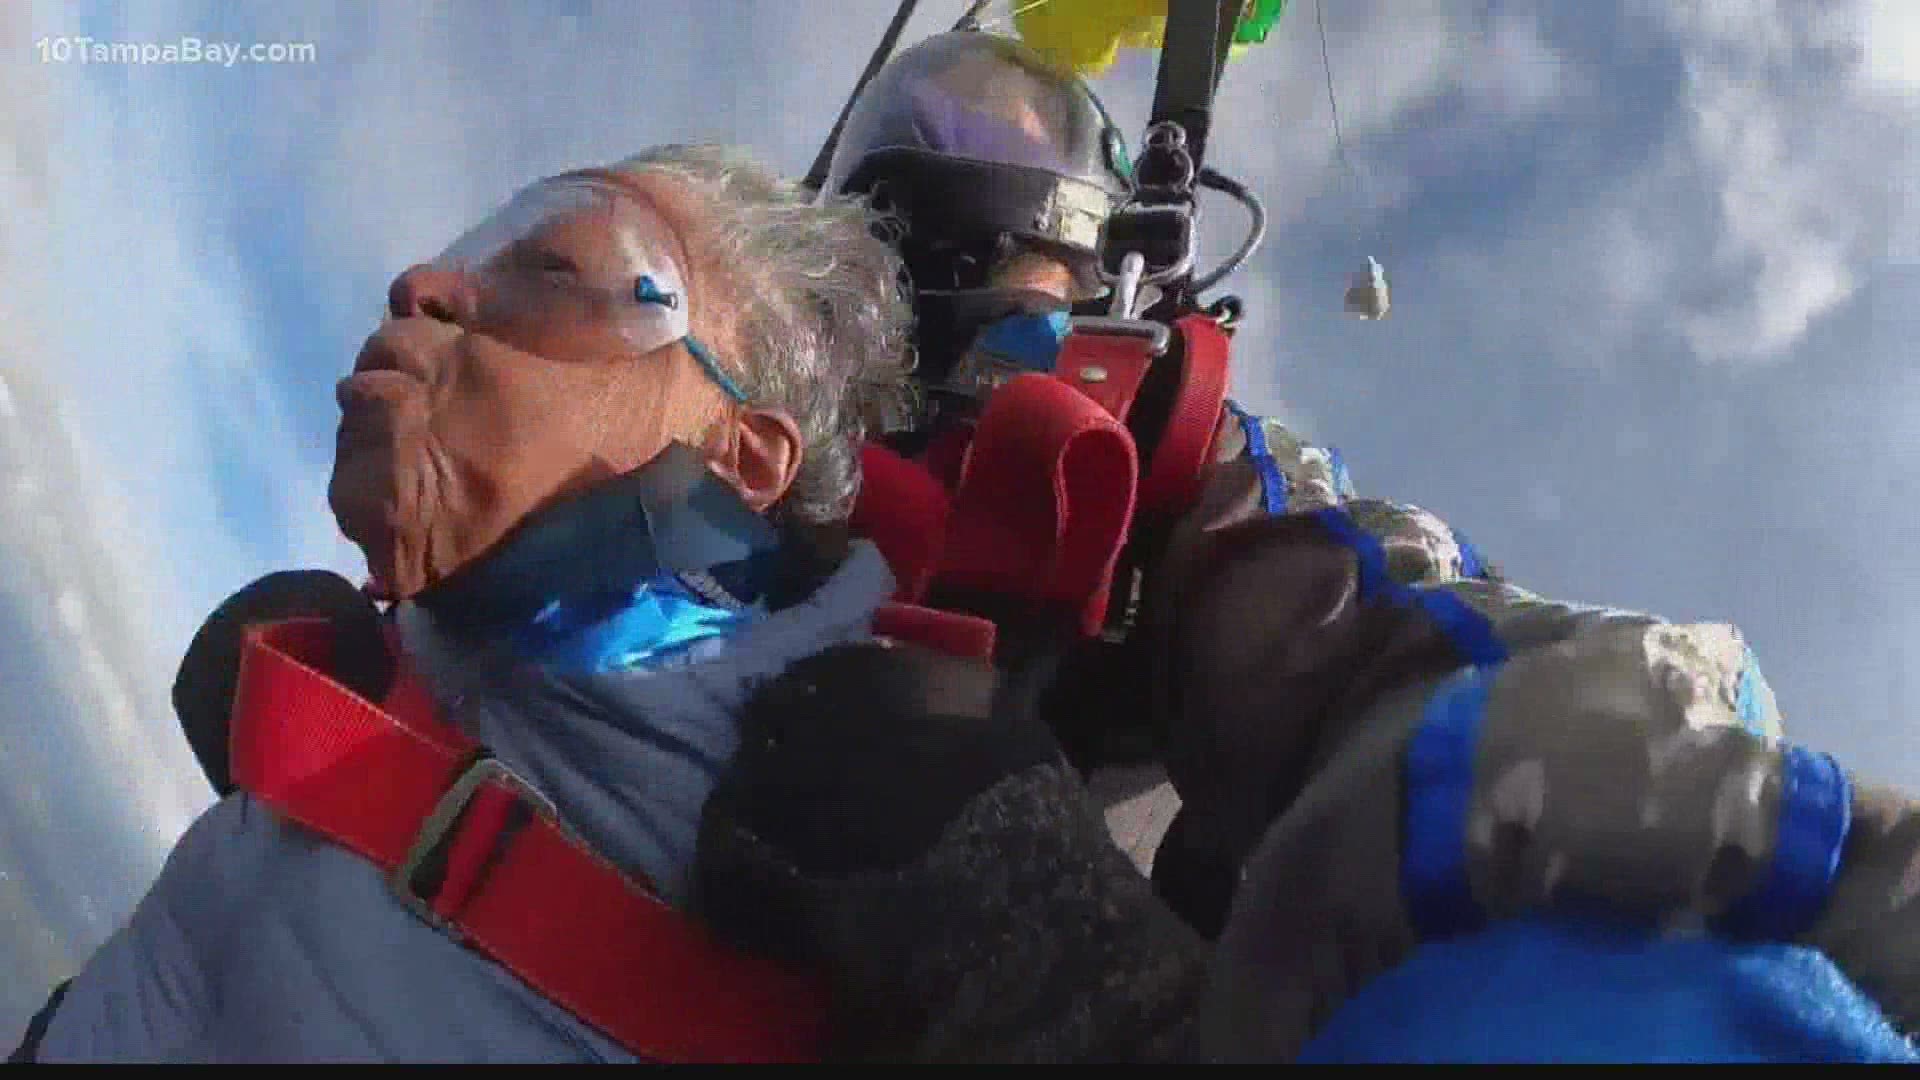 Millie Bailey, who's a World War II veteran, had been wanting to jump out of a plane for more than 10 years.